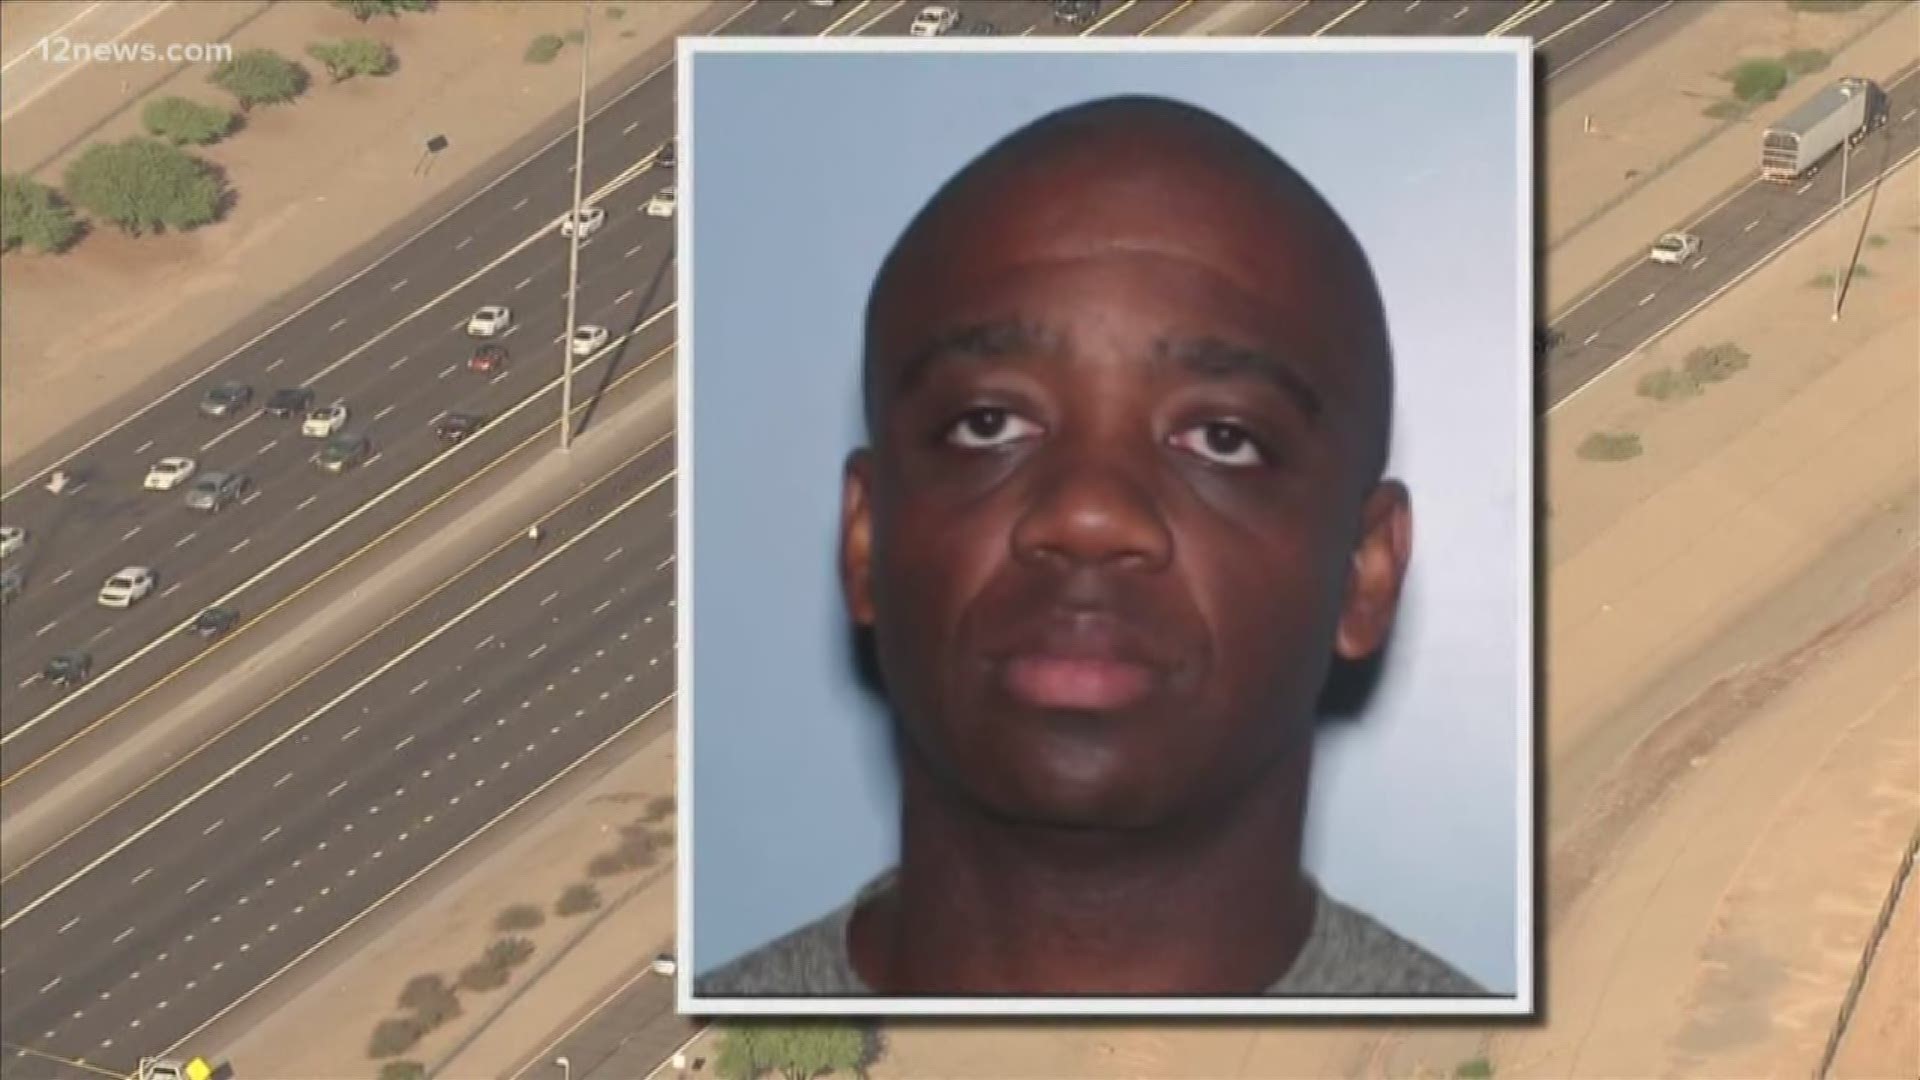 The Arizona Department of Public Safety is asking the public for tips regarding an alleged predator patrol officer. Tremaine Jackson is facing 61 counts of kidnapping, harassment and sex abuse. DPS says nine women have come forward with allegation, but investigators believe there may be more out there.